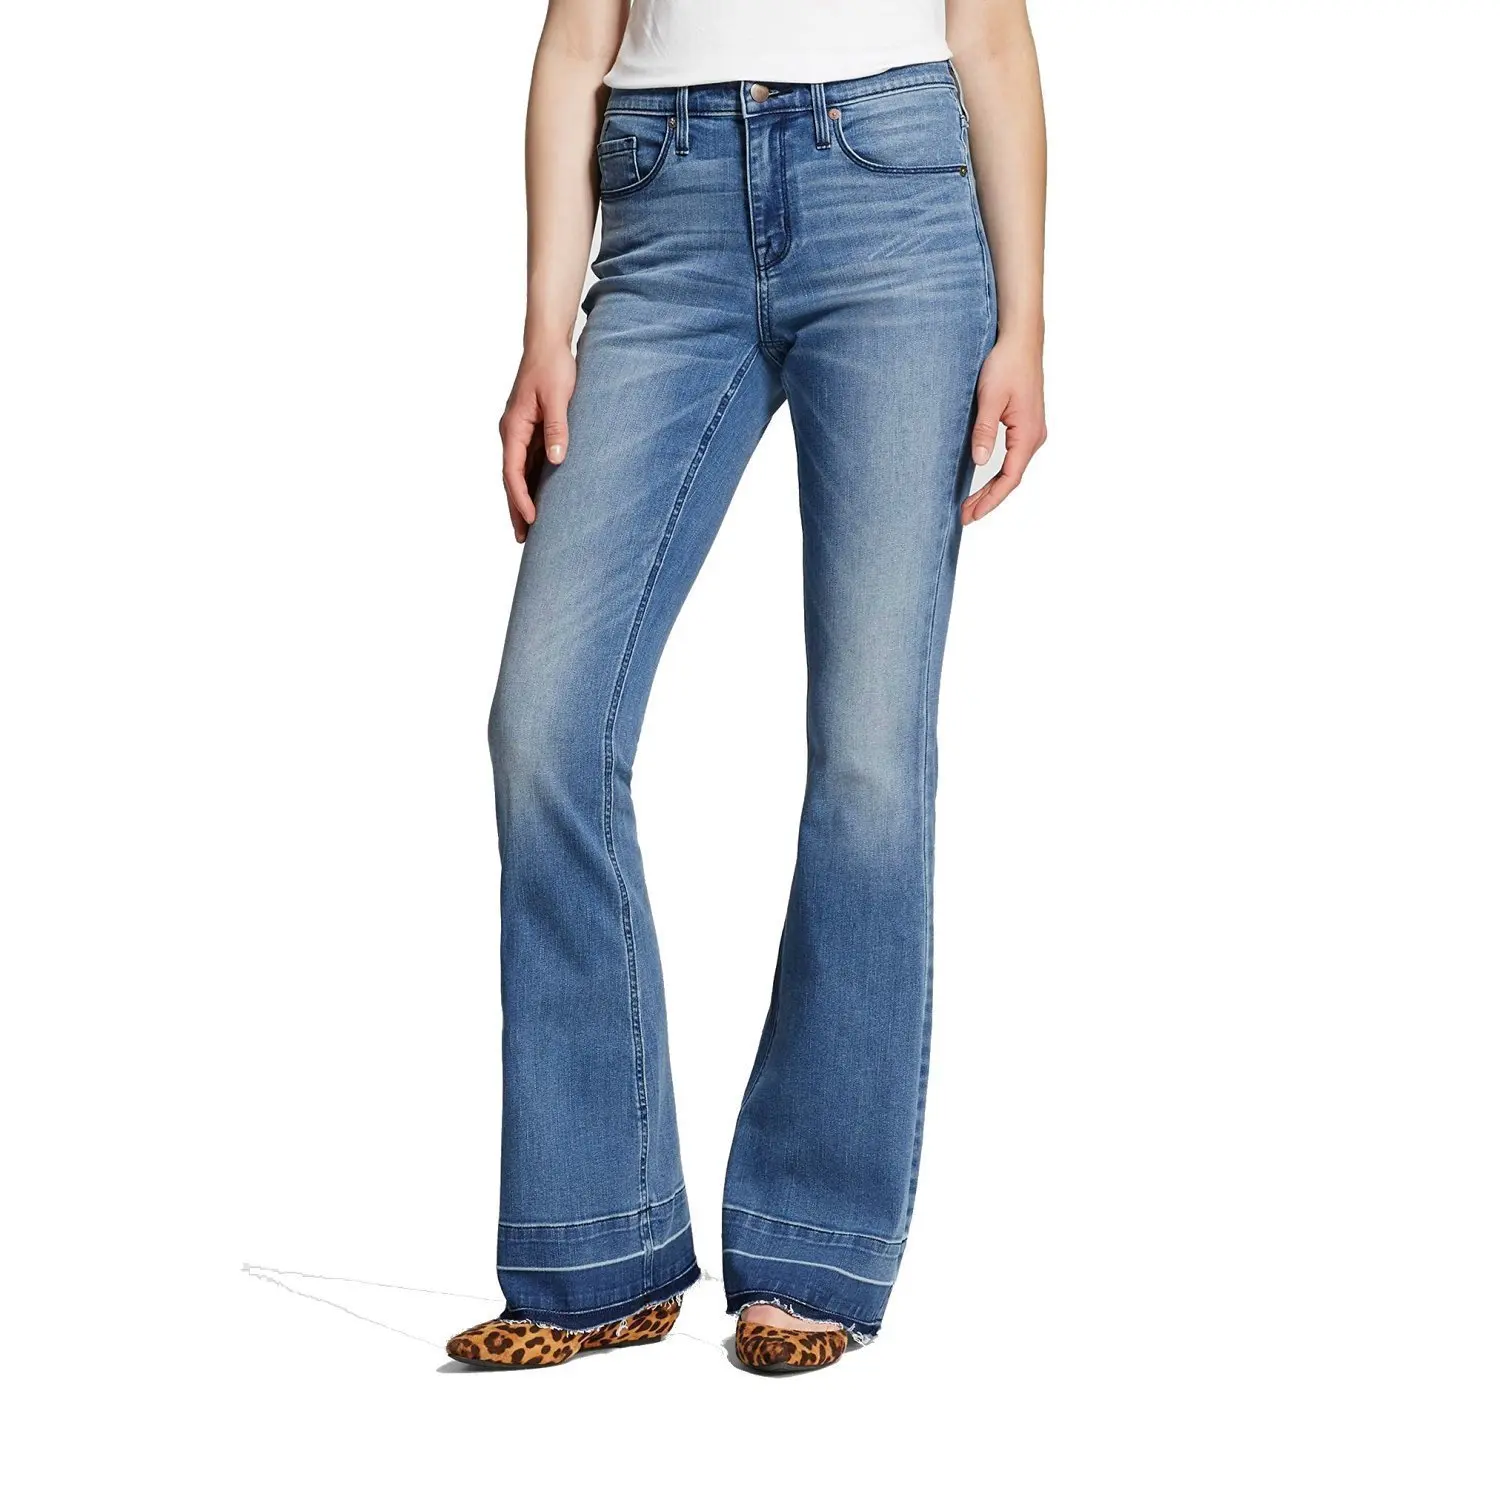 Mossimo Womens Jeans Size Chart